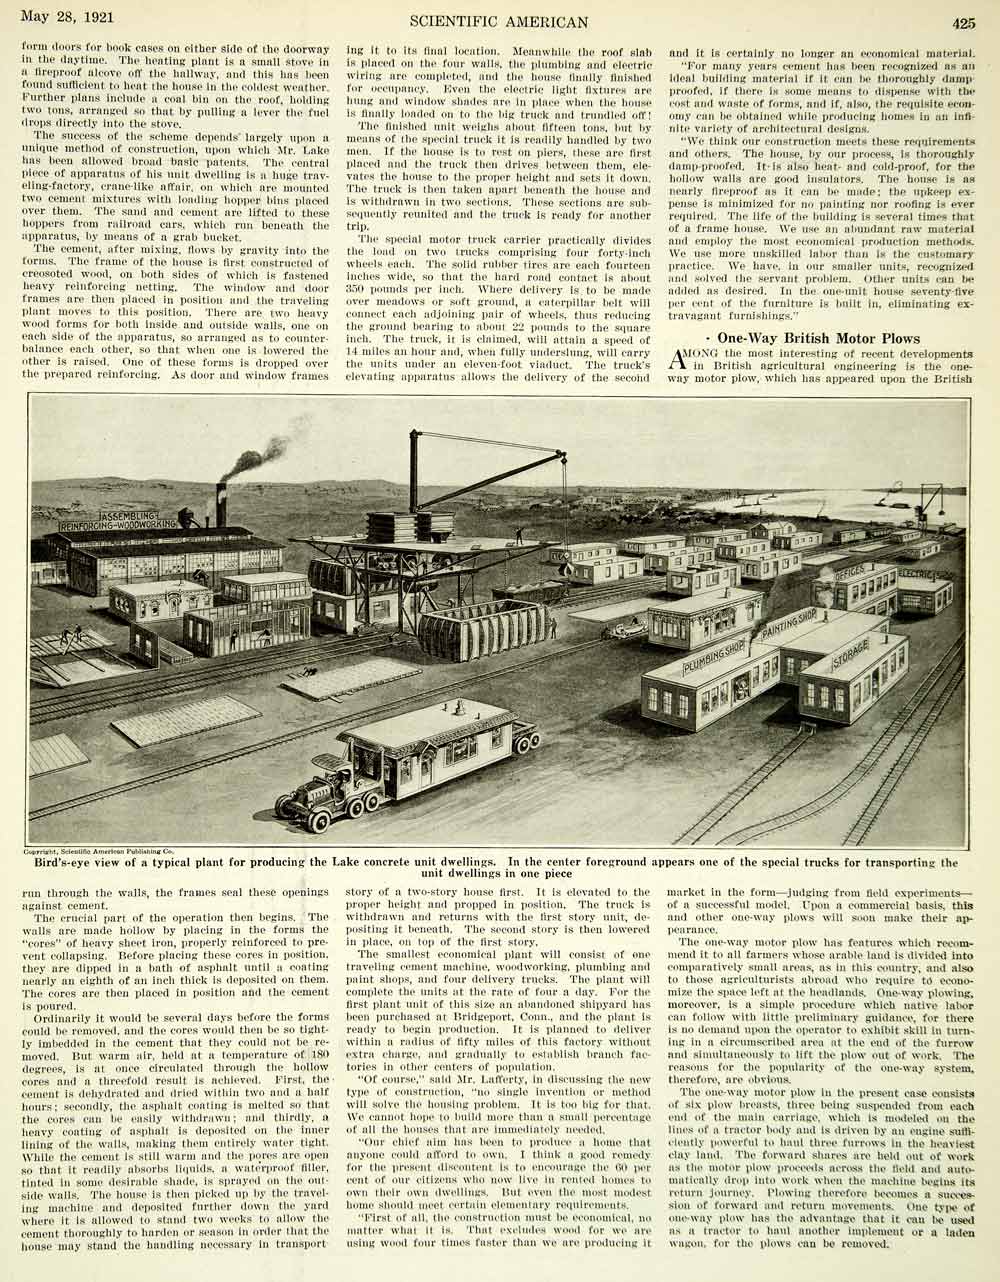 1921 Article Harry A Mount One Piece House Simon Lake Prefabricated SCA5